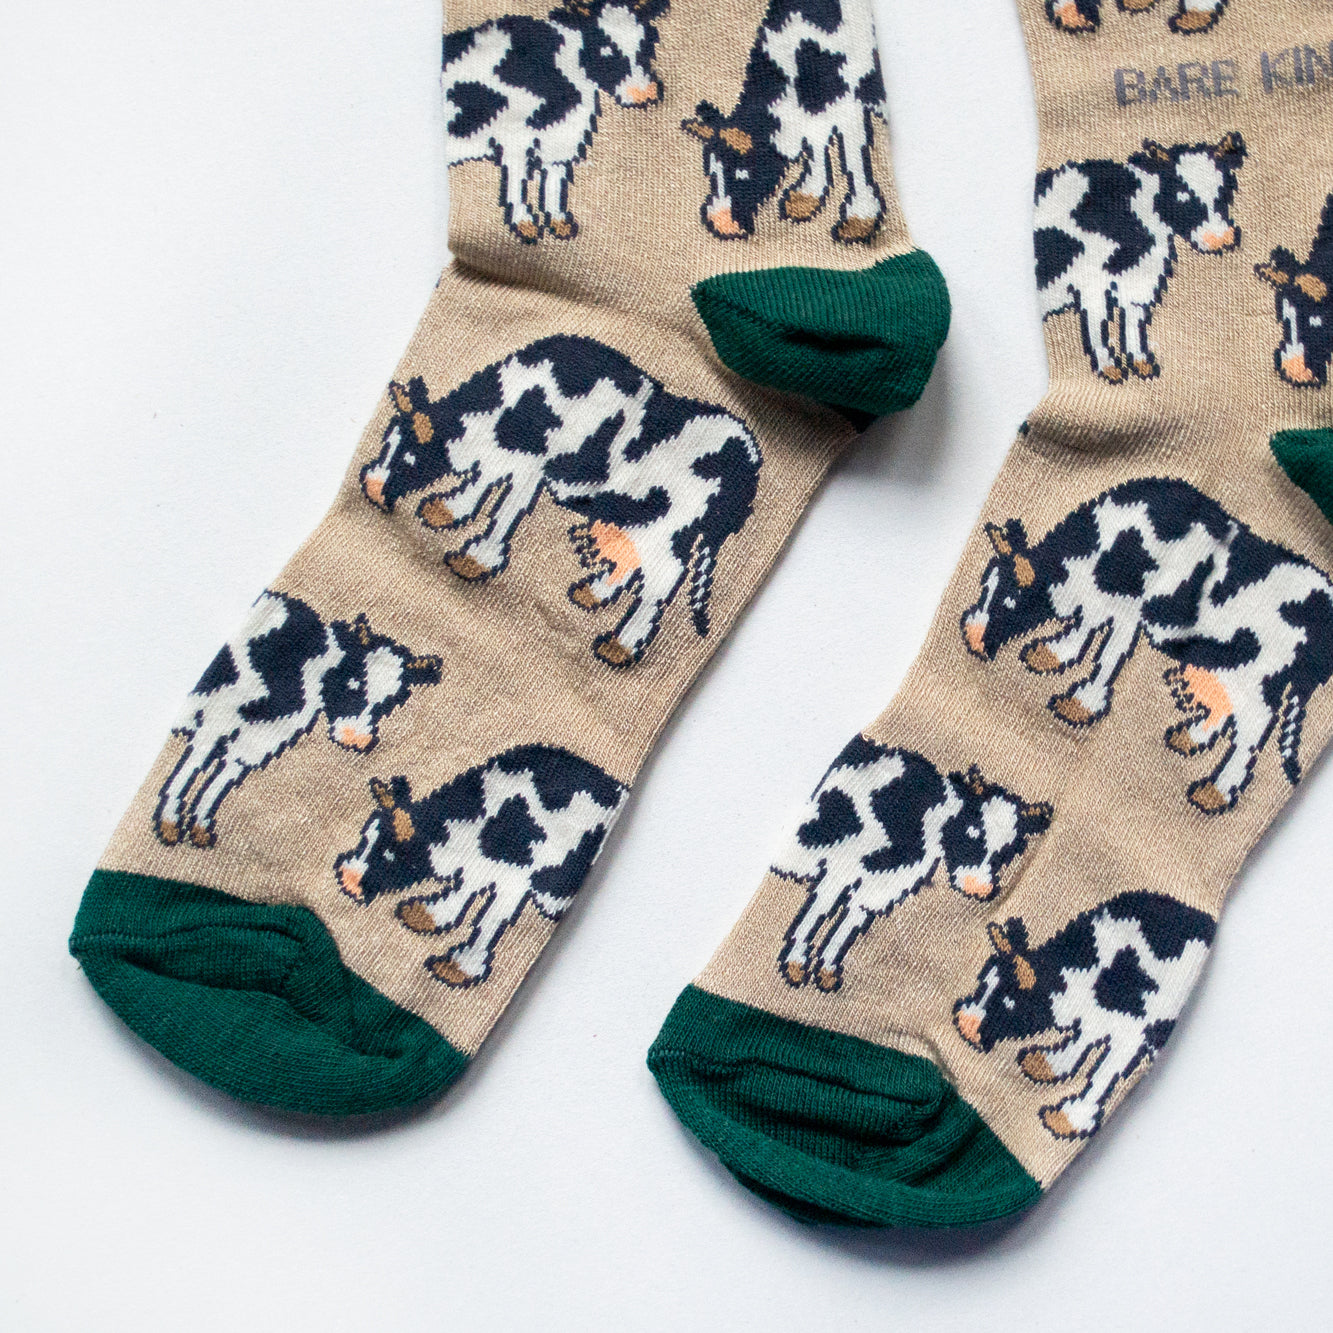 COW47-Bare Kind Bamboo Socks Adult - Cows